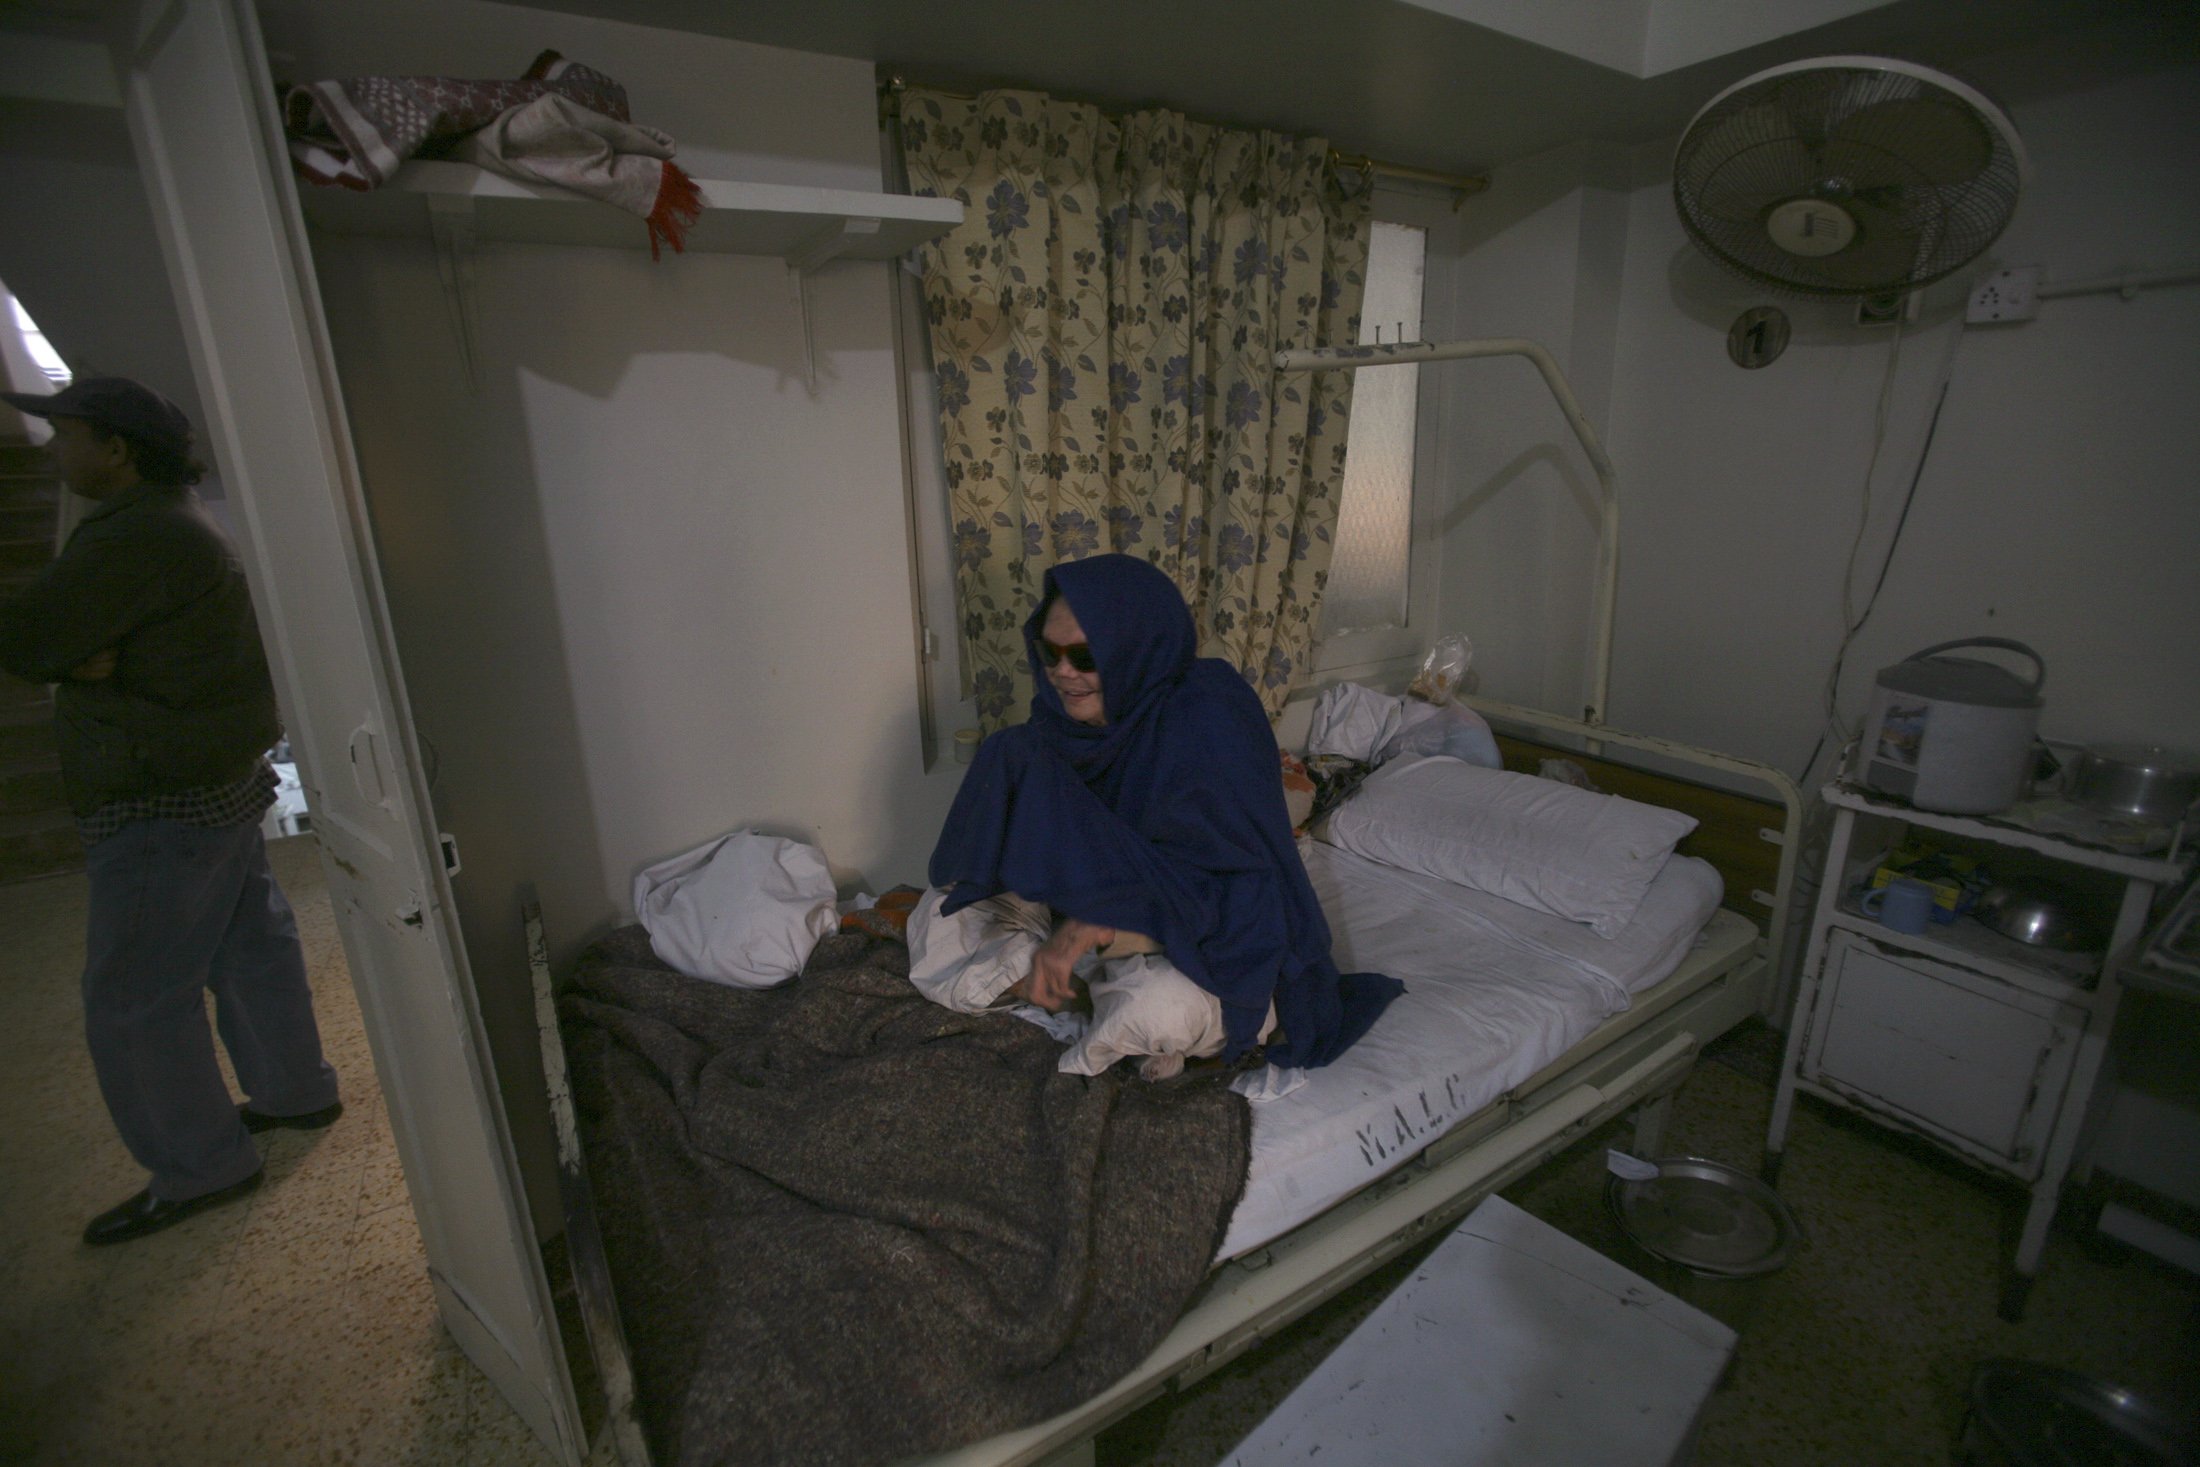 A patient sits on her bed at Marie Adelaide Leprosy Center in Karachi, Pakistan, in this Jan. 25, 2008. (CNS photo/Athar Hussain, Reuters)